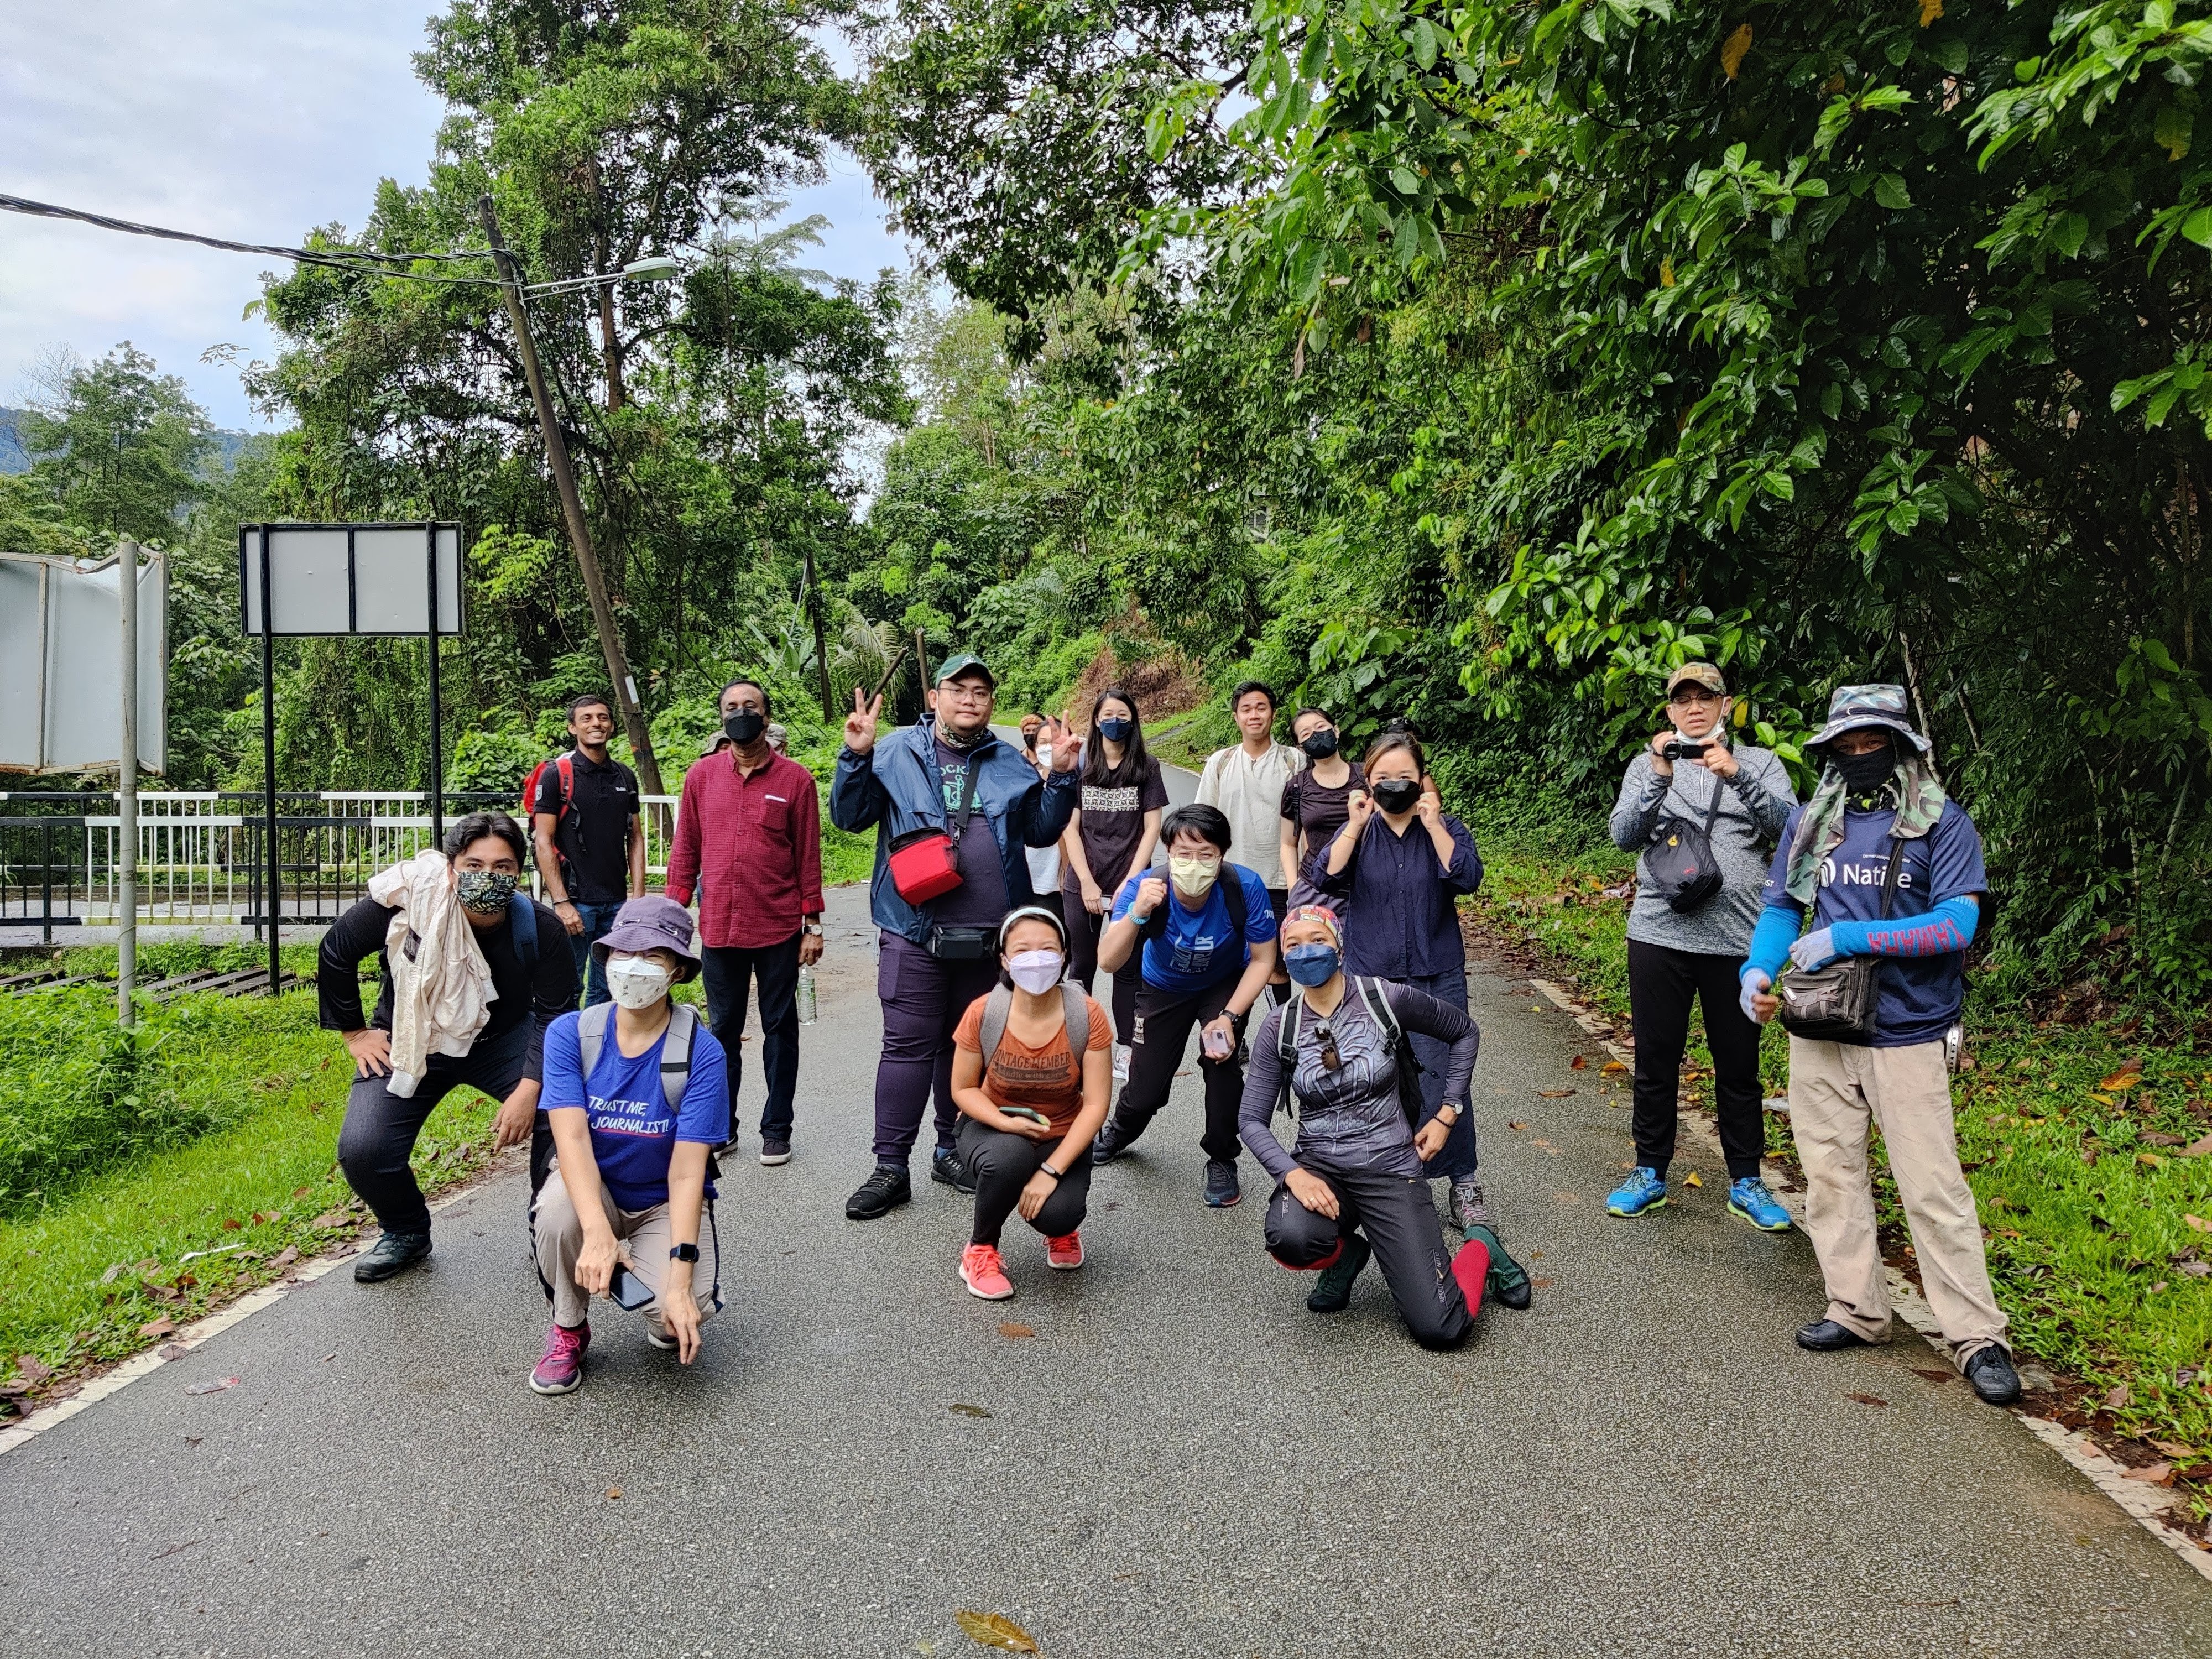 a group of people in hiking attire and gear pose for the camera in a group shot. some of them are masked. they are standing on a path with trees behind them